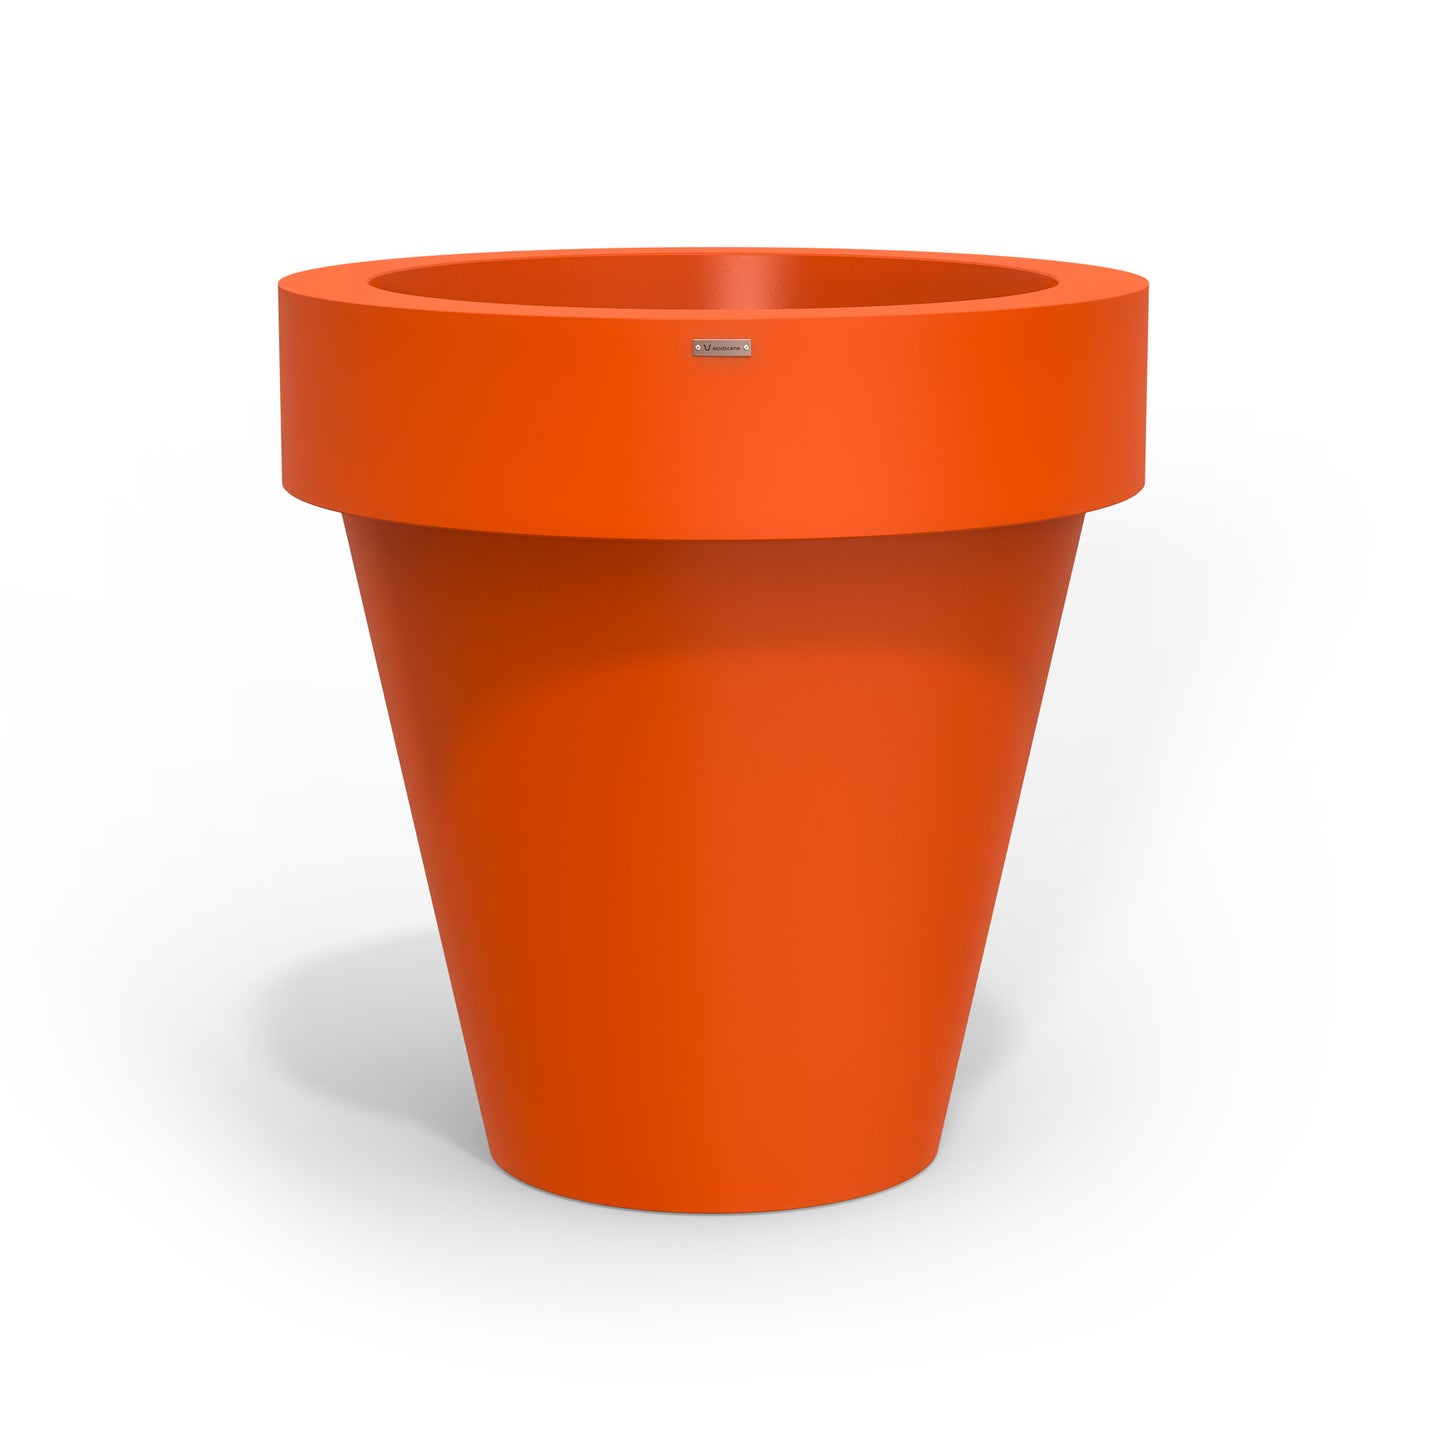 Extra large Modscene planter pot in a orange colour. New Zealand made.